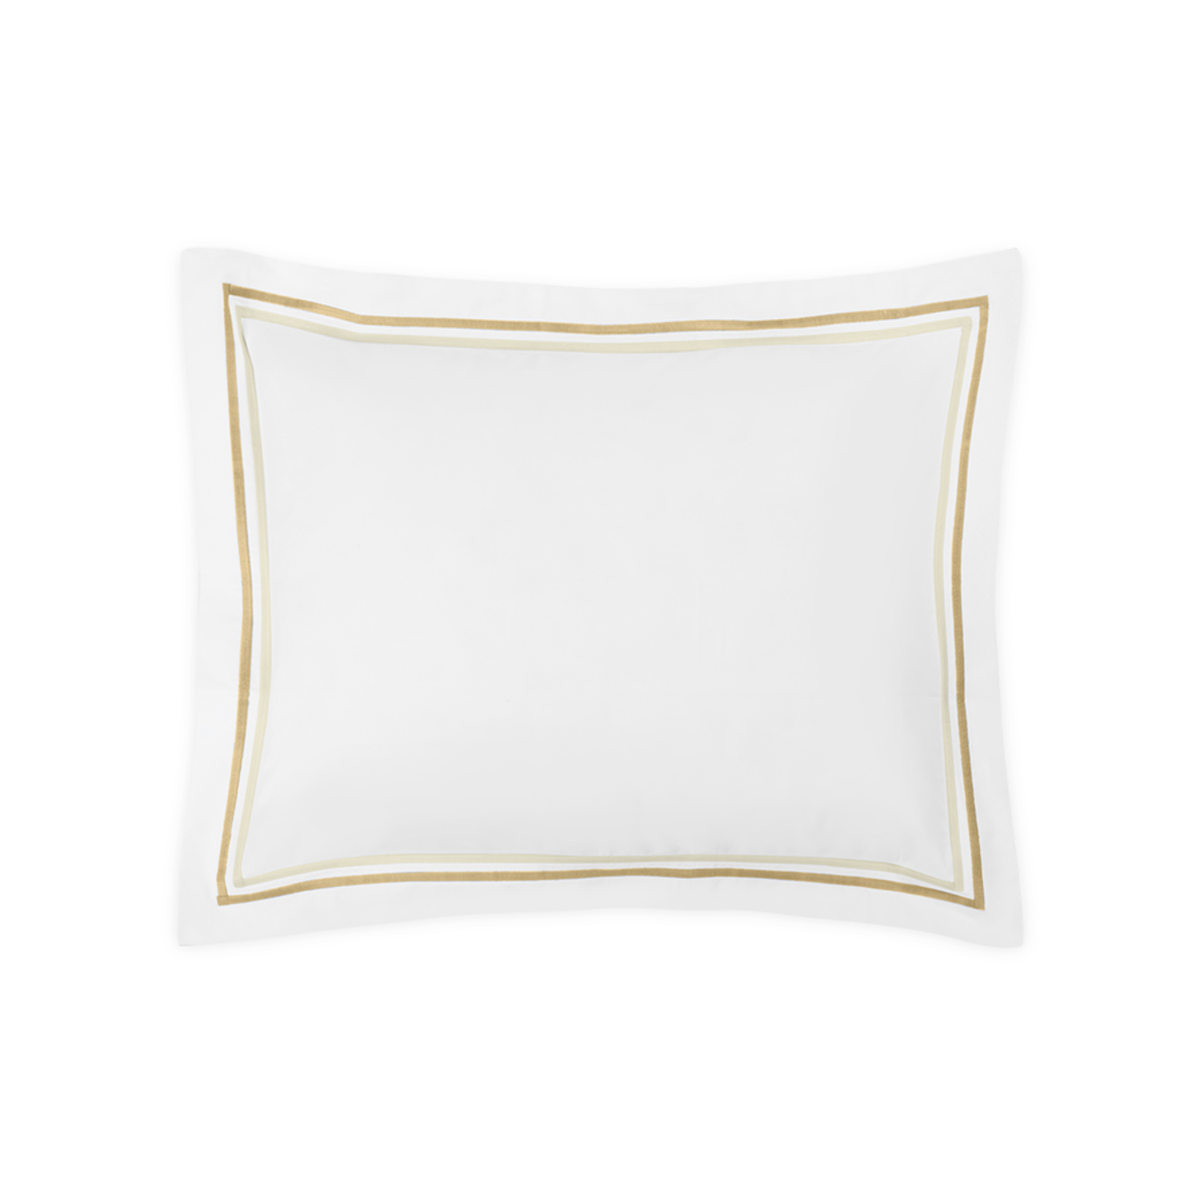 Boudoir Sham of Matouk Essex Bedding Collection in Champagne Color